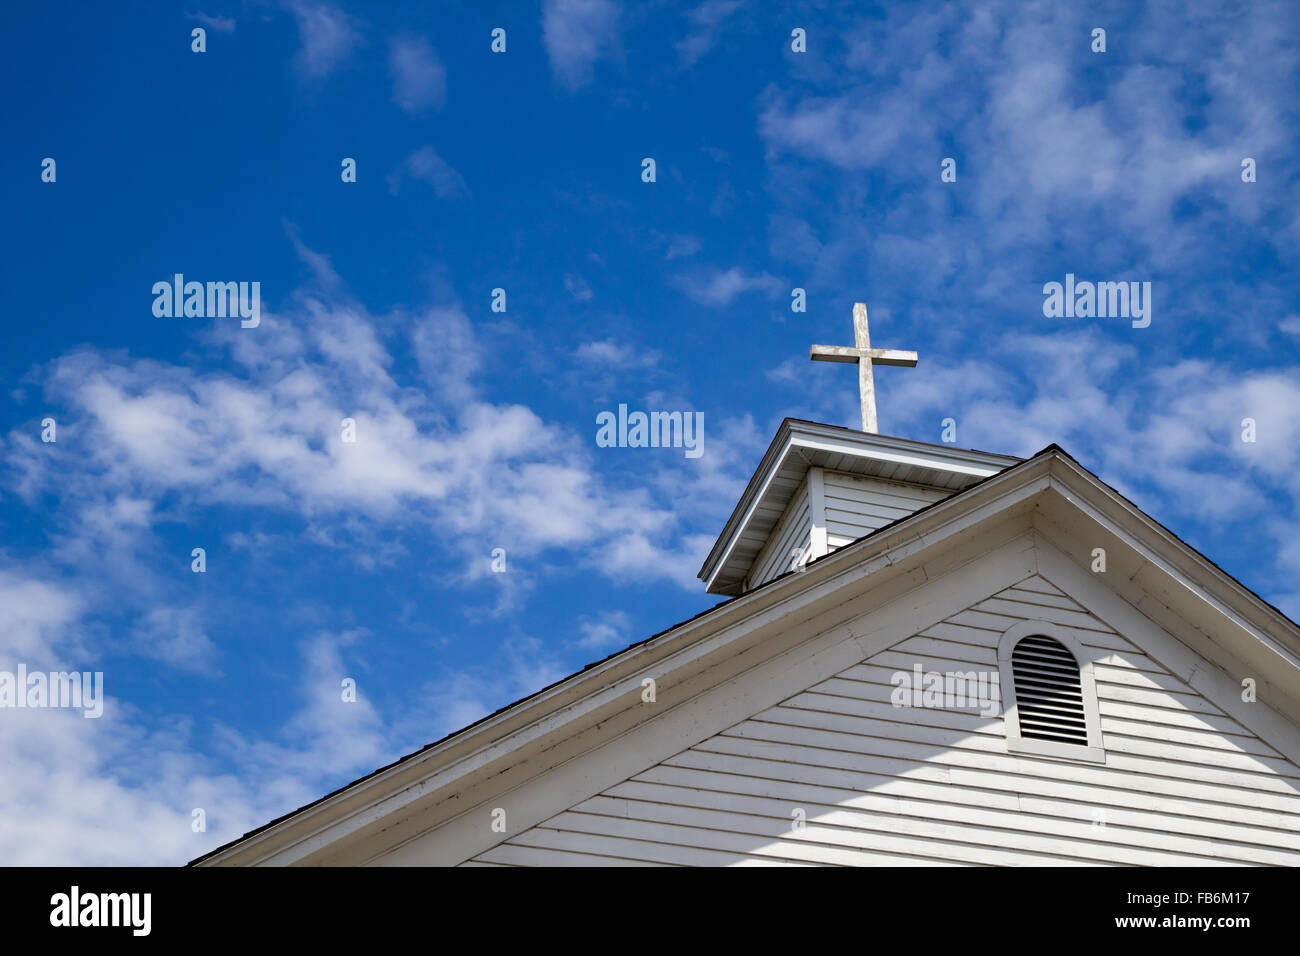 Christian Wooden Cross Background With Copy Space. Wooden cross and  steeple with a sunny blue sky and copy space. Stock Photo